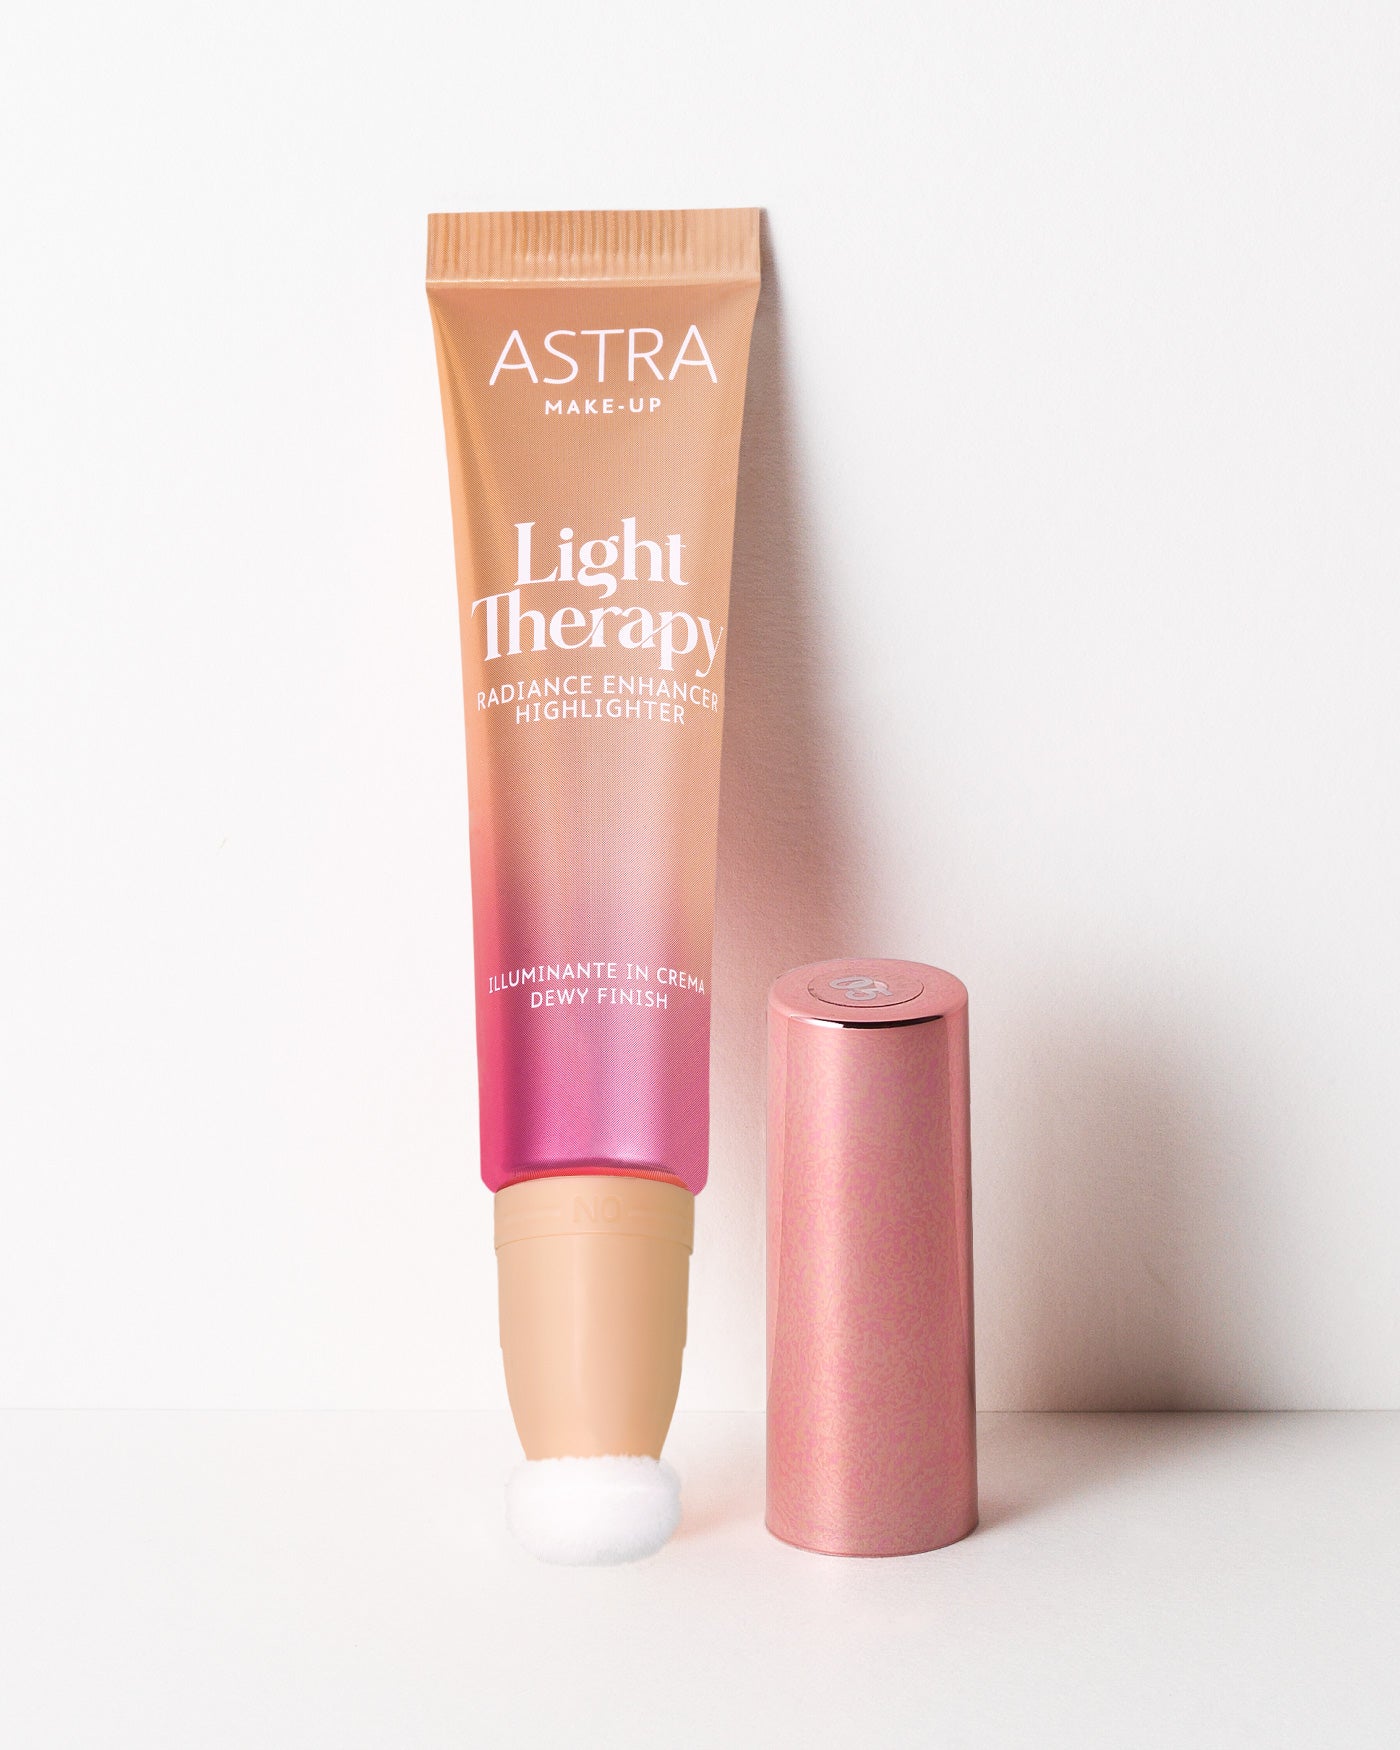 LIGHT THERAPY - 05 - Cognitive Pink - Astra Make-Up